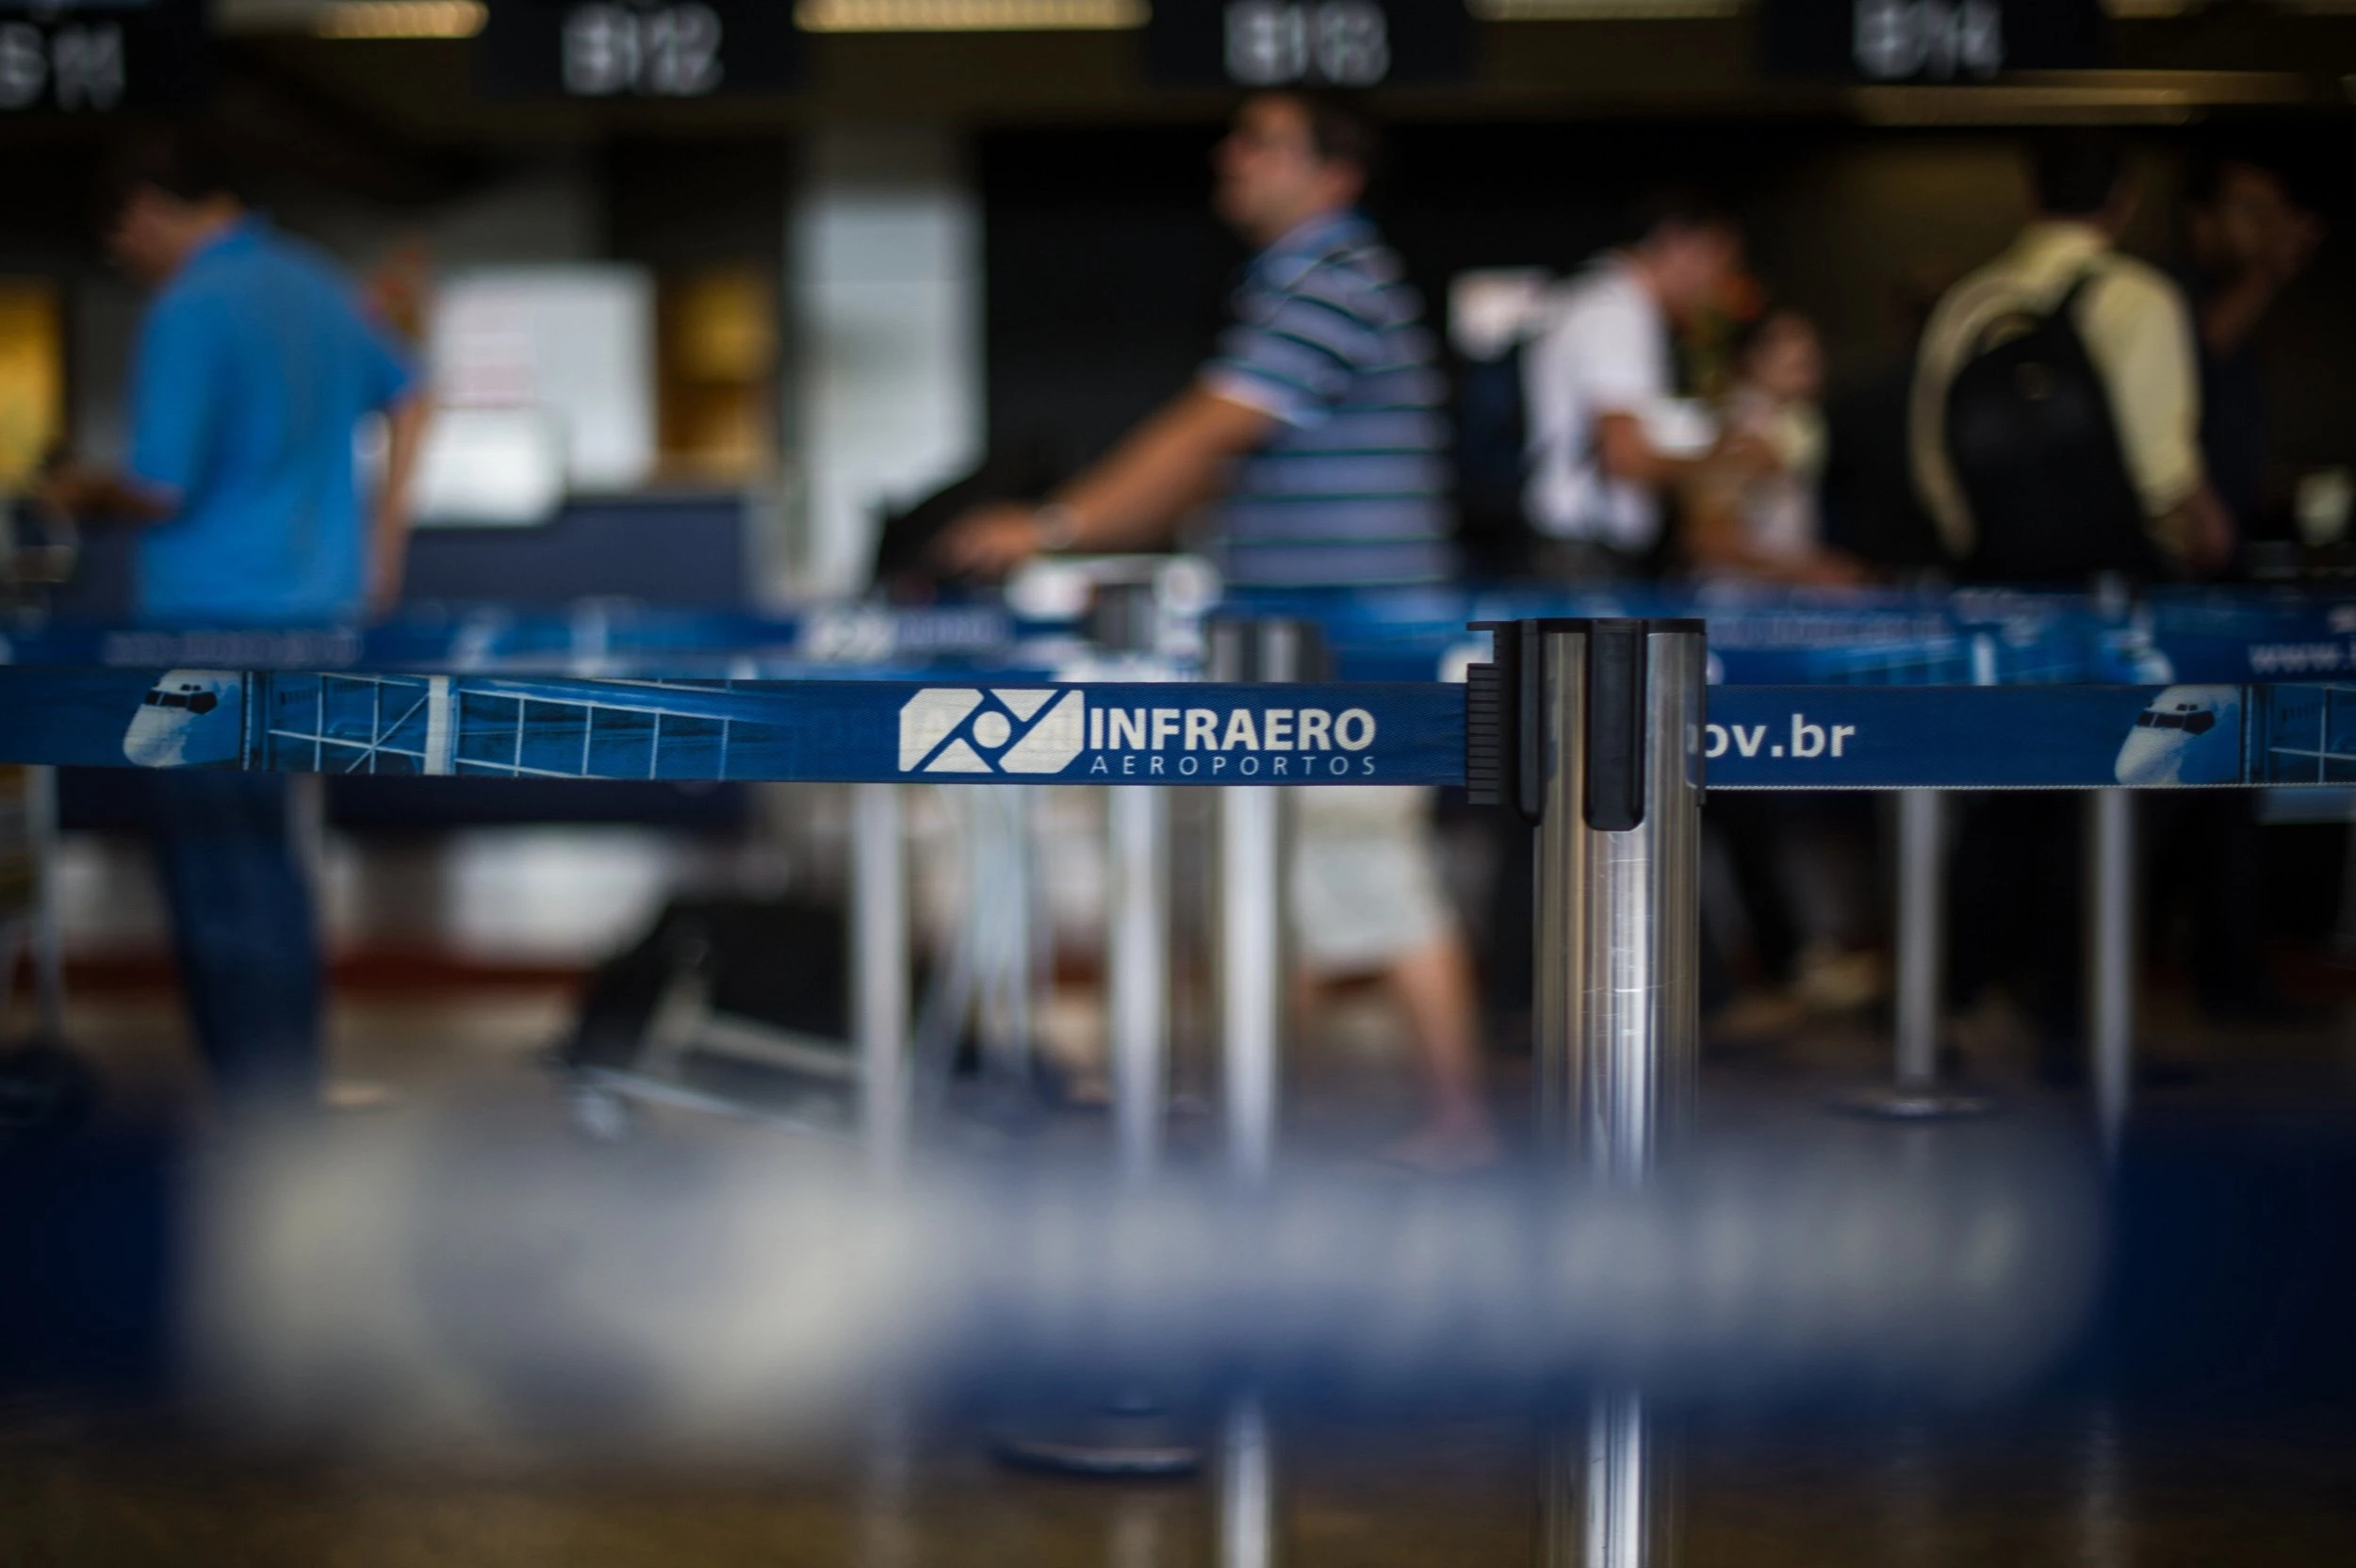 People make a line at the check-in counter of Guarulhos international airport, in Guarulhos, northern outskirts of Sao Paulo, Brazil, on February 6, 2012. The Brazilian government privatized three airports ahead of the 2014 World Cup, including Sao Paulo's Guarulhos, currently run by state-owned INFRAERO, through concessions valued at a total of $14 billion. AFP PHOTO / Yasuyoshi CHIBA (Photo credit should read YASUYOSHI CHIBA/AFP via Getty Images)